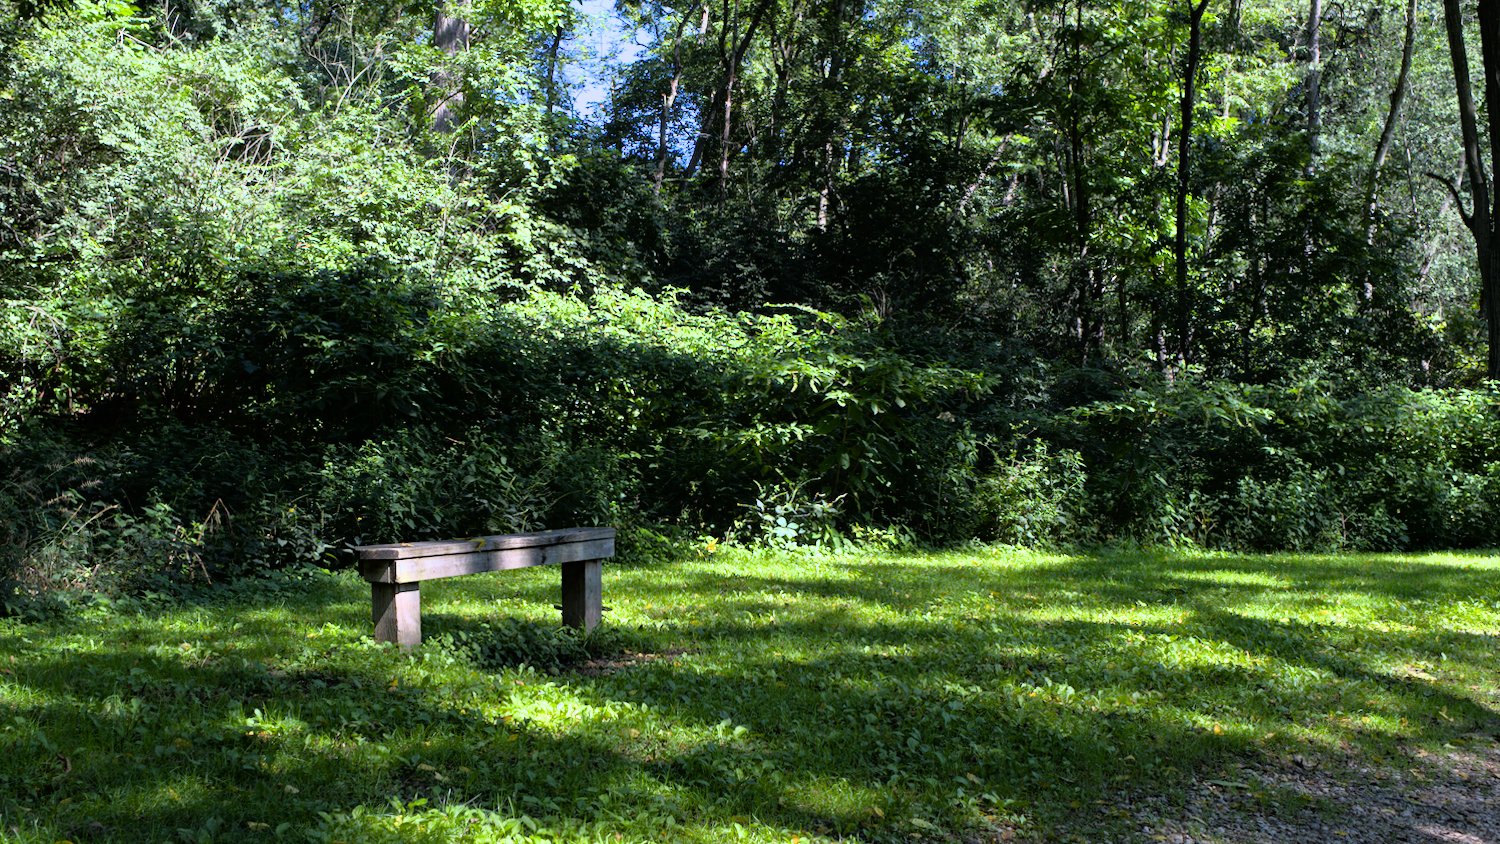 Bench along the path.